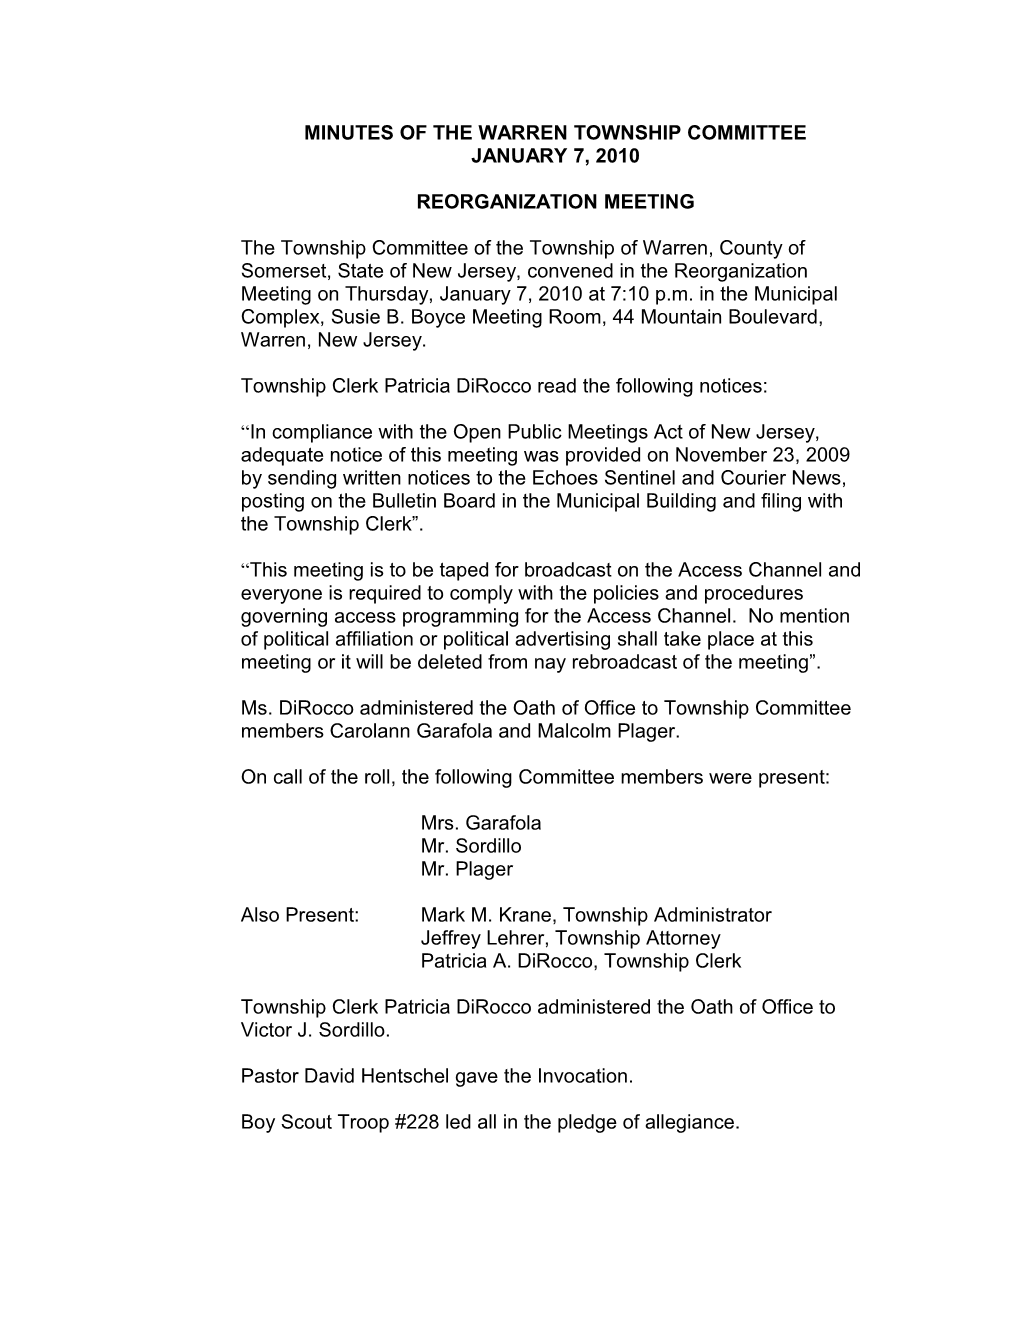 Minutes of the Warren Township Committee s7